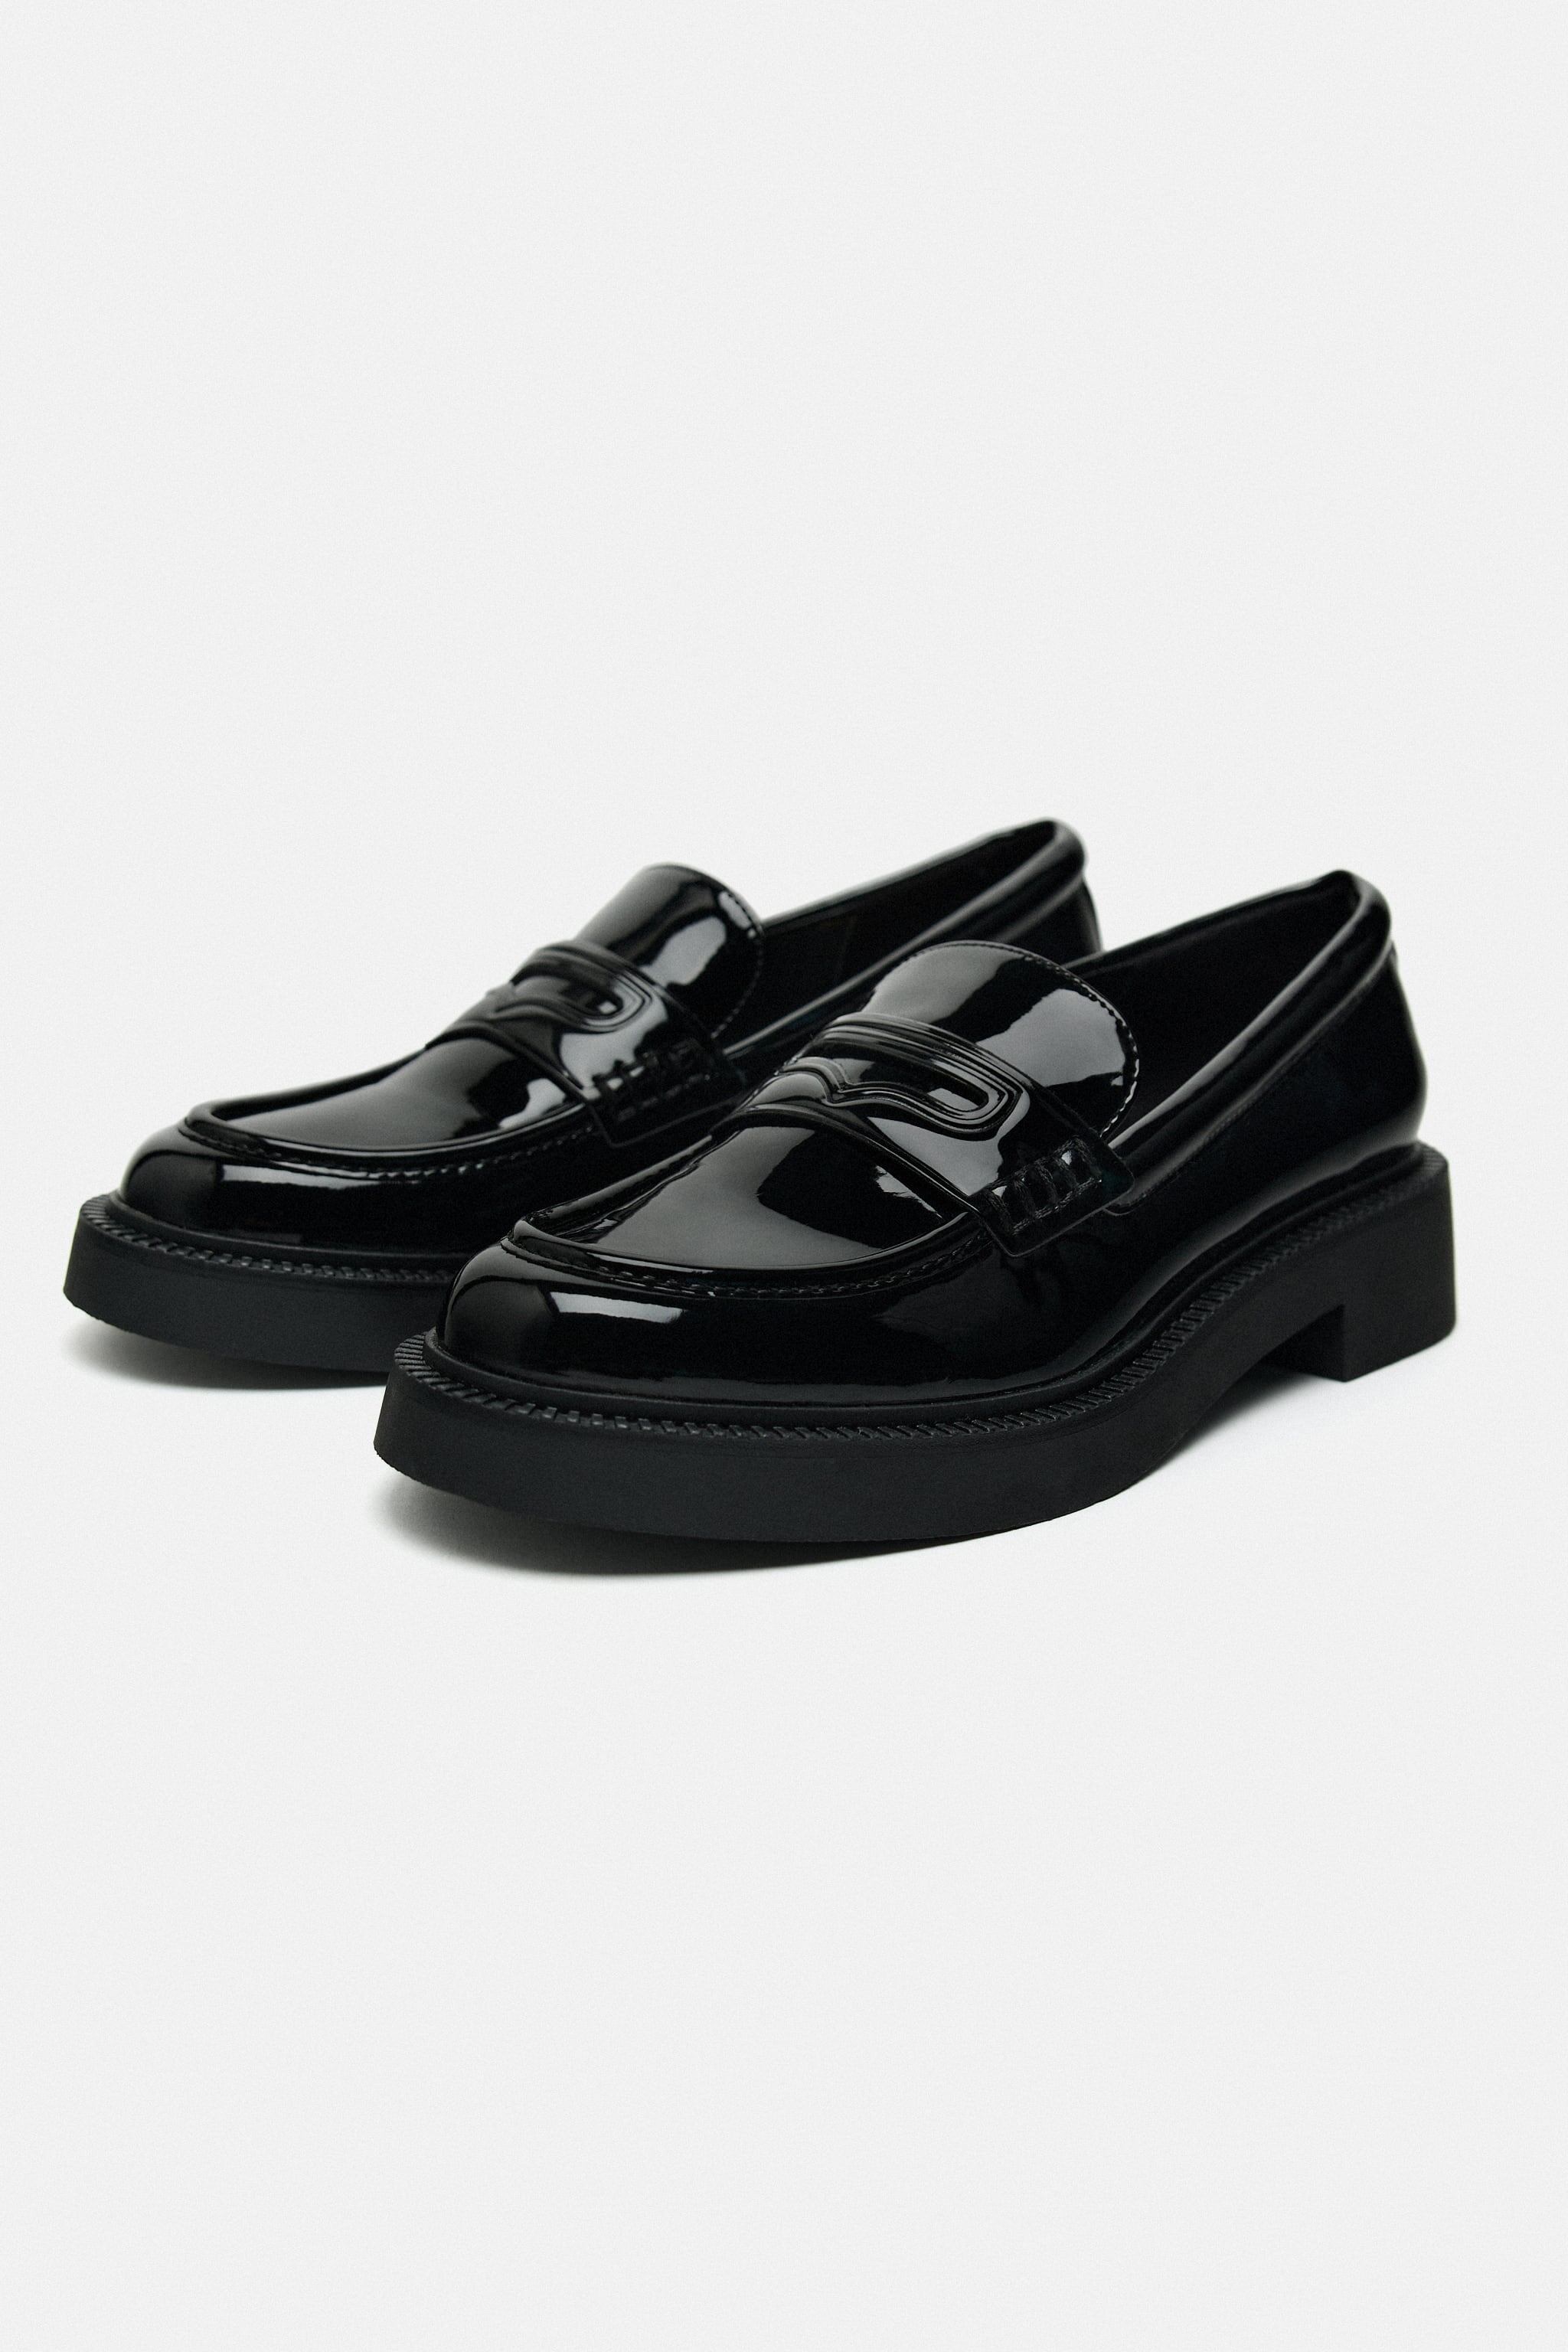 FAUX PATENT LEATHER FLAT PENNY LOAFERS